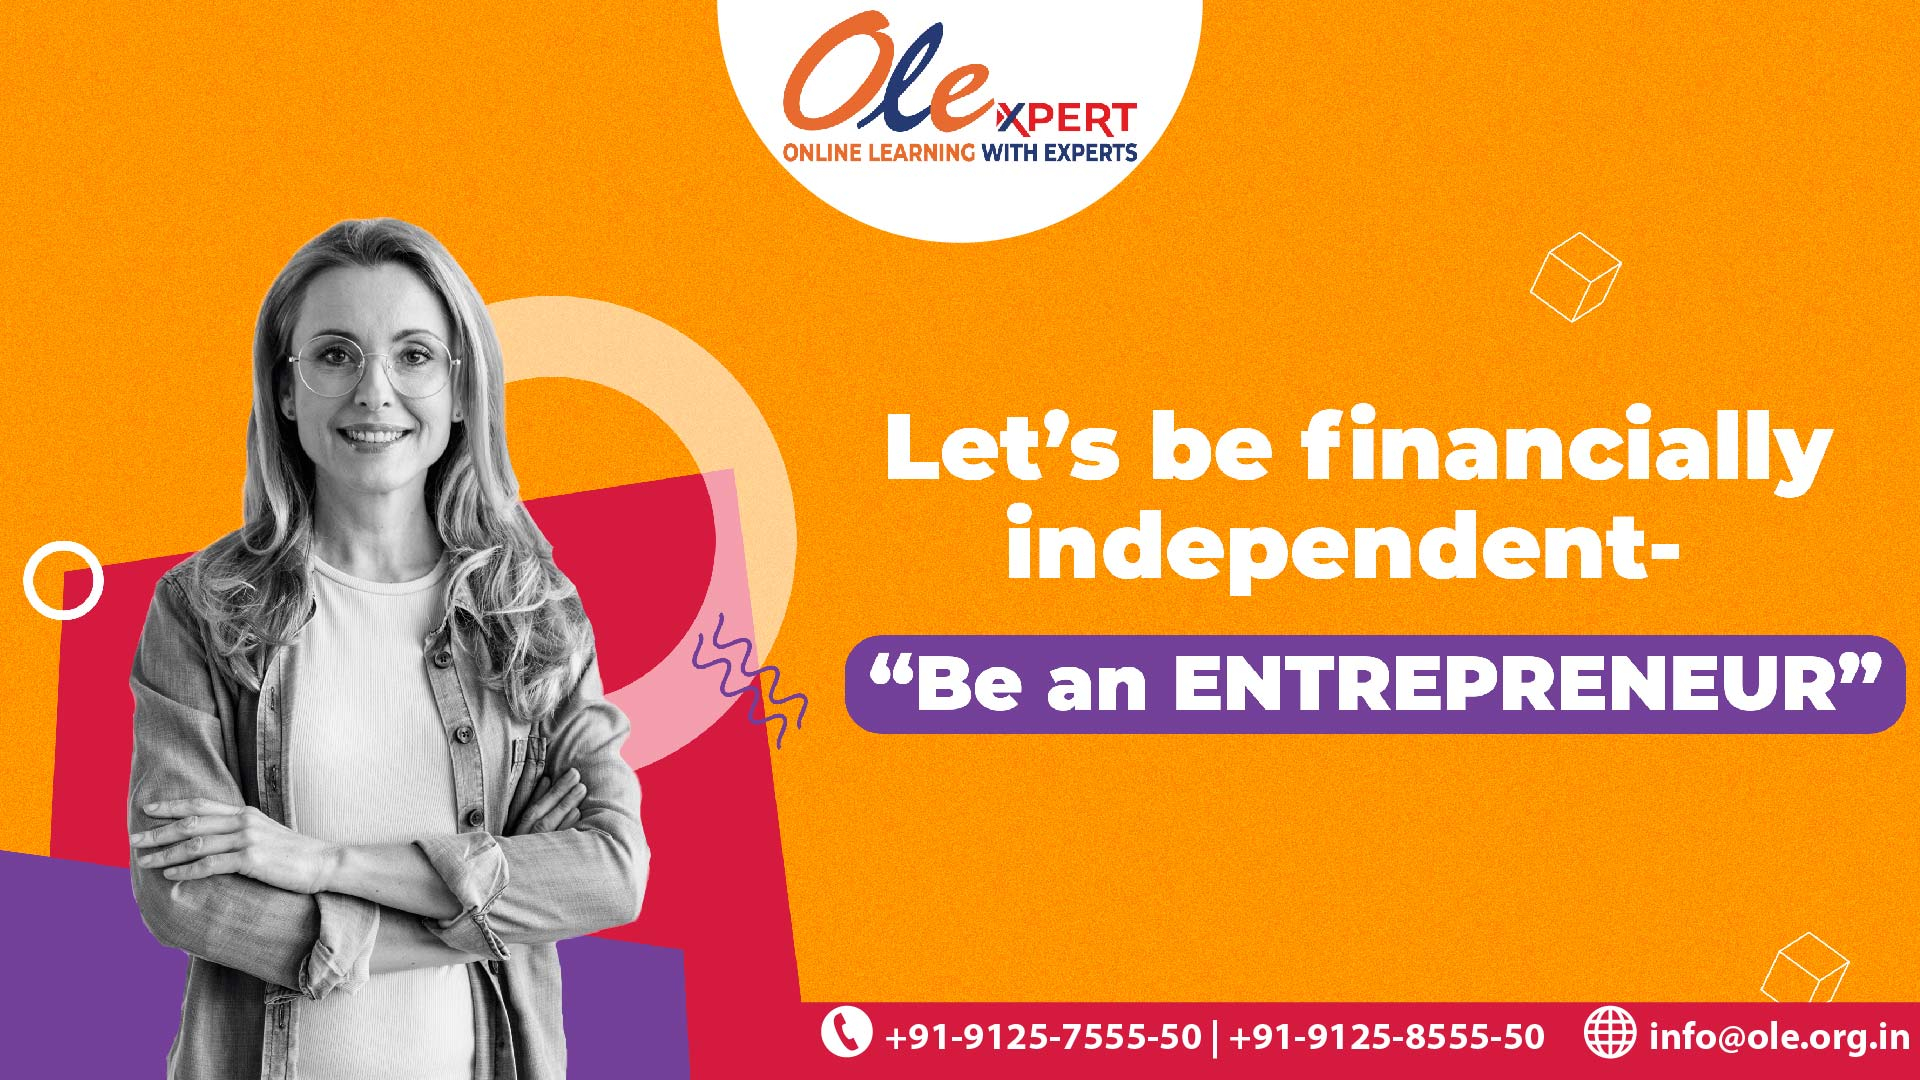 Let’s be financially independent- “be an ENTREPRENEUR”